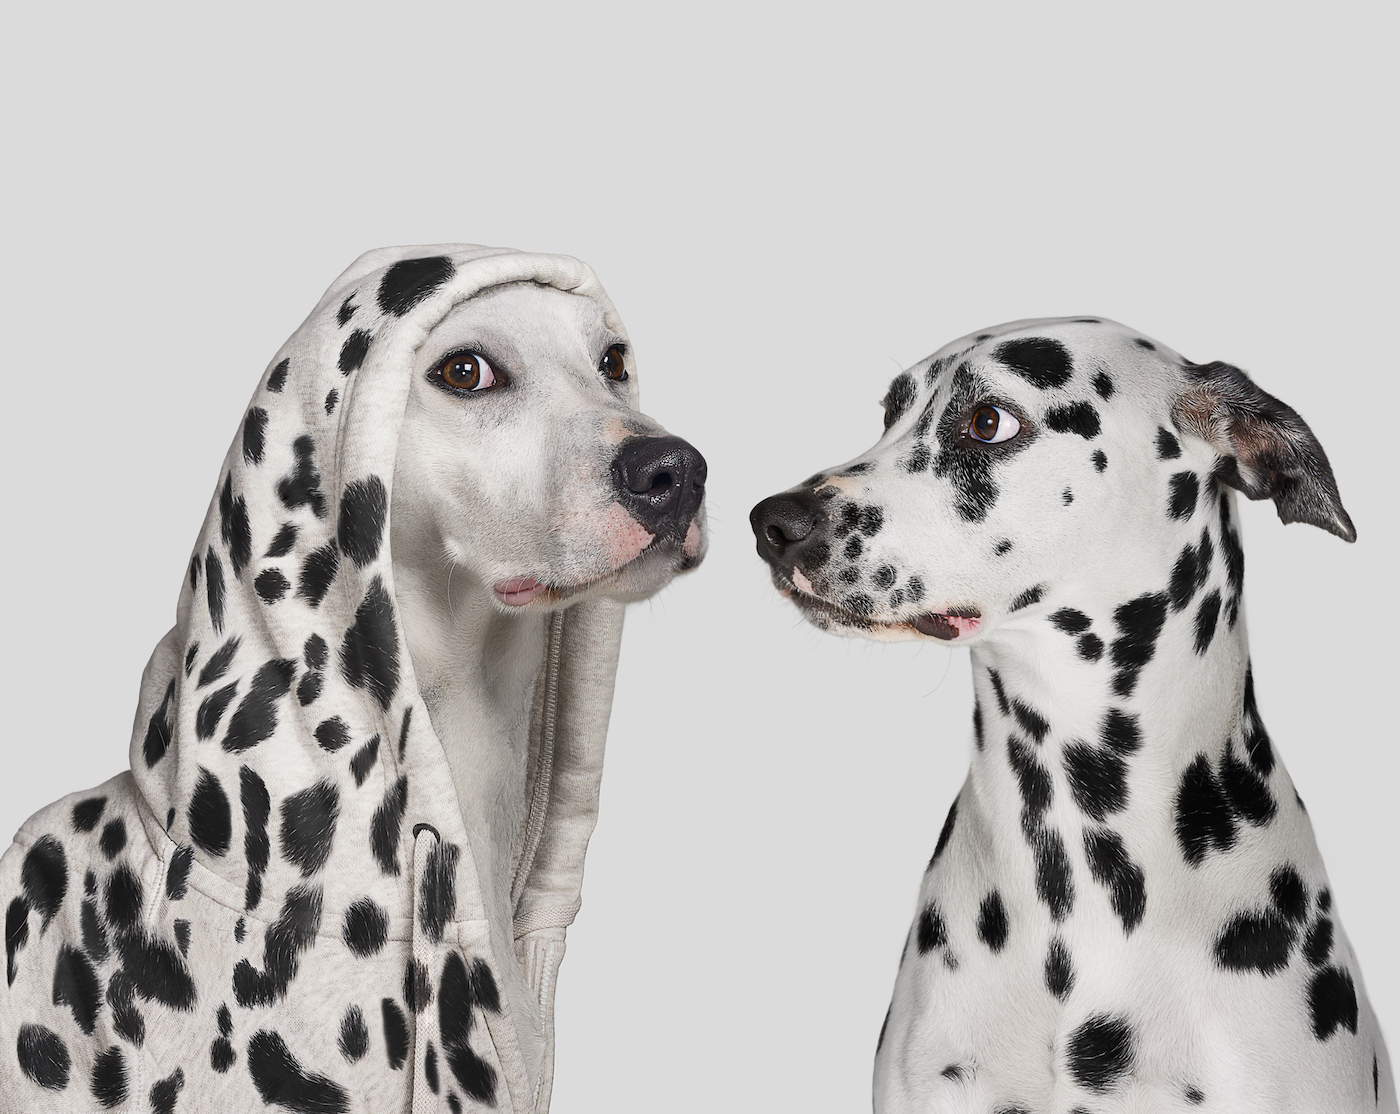 Dalmatian dog startled by white dog wearing hoodie with spots, pretending to be a Dalmatian